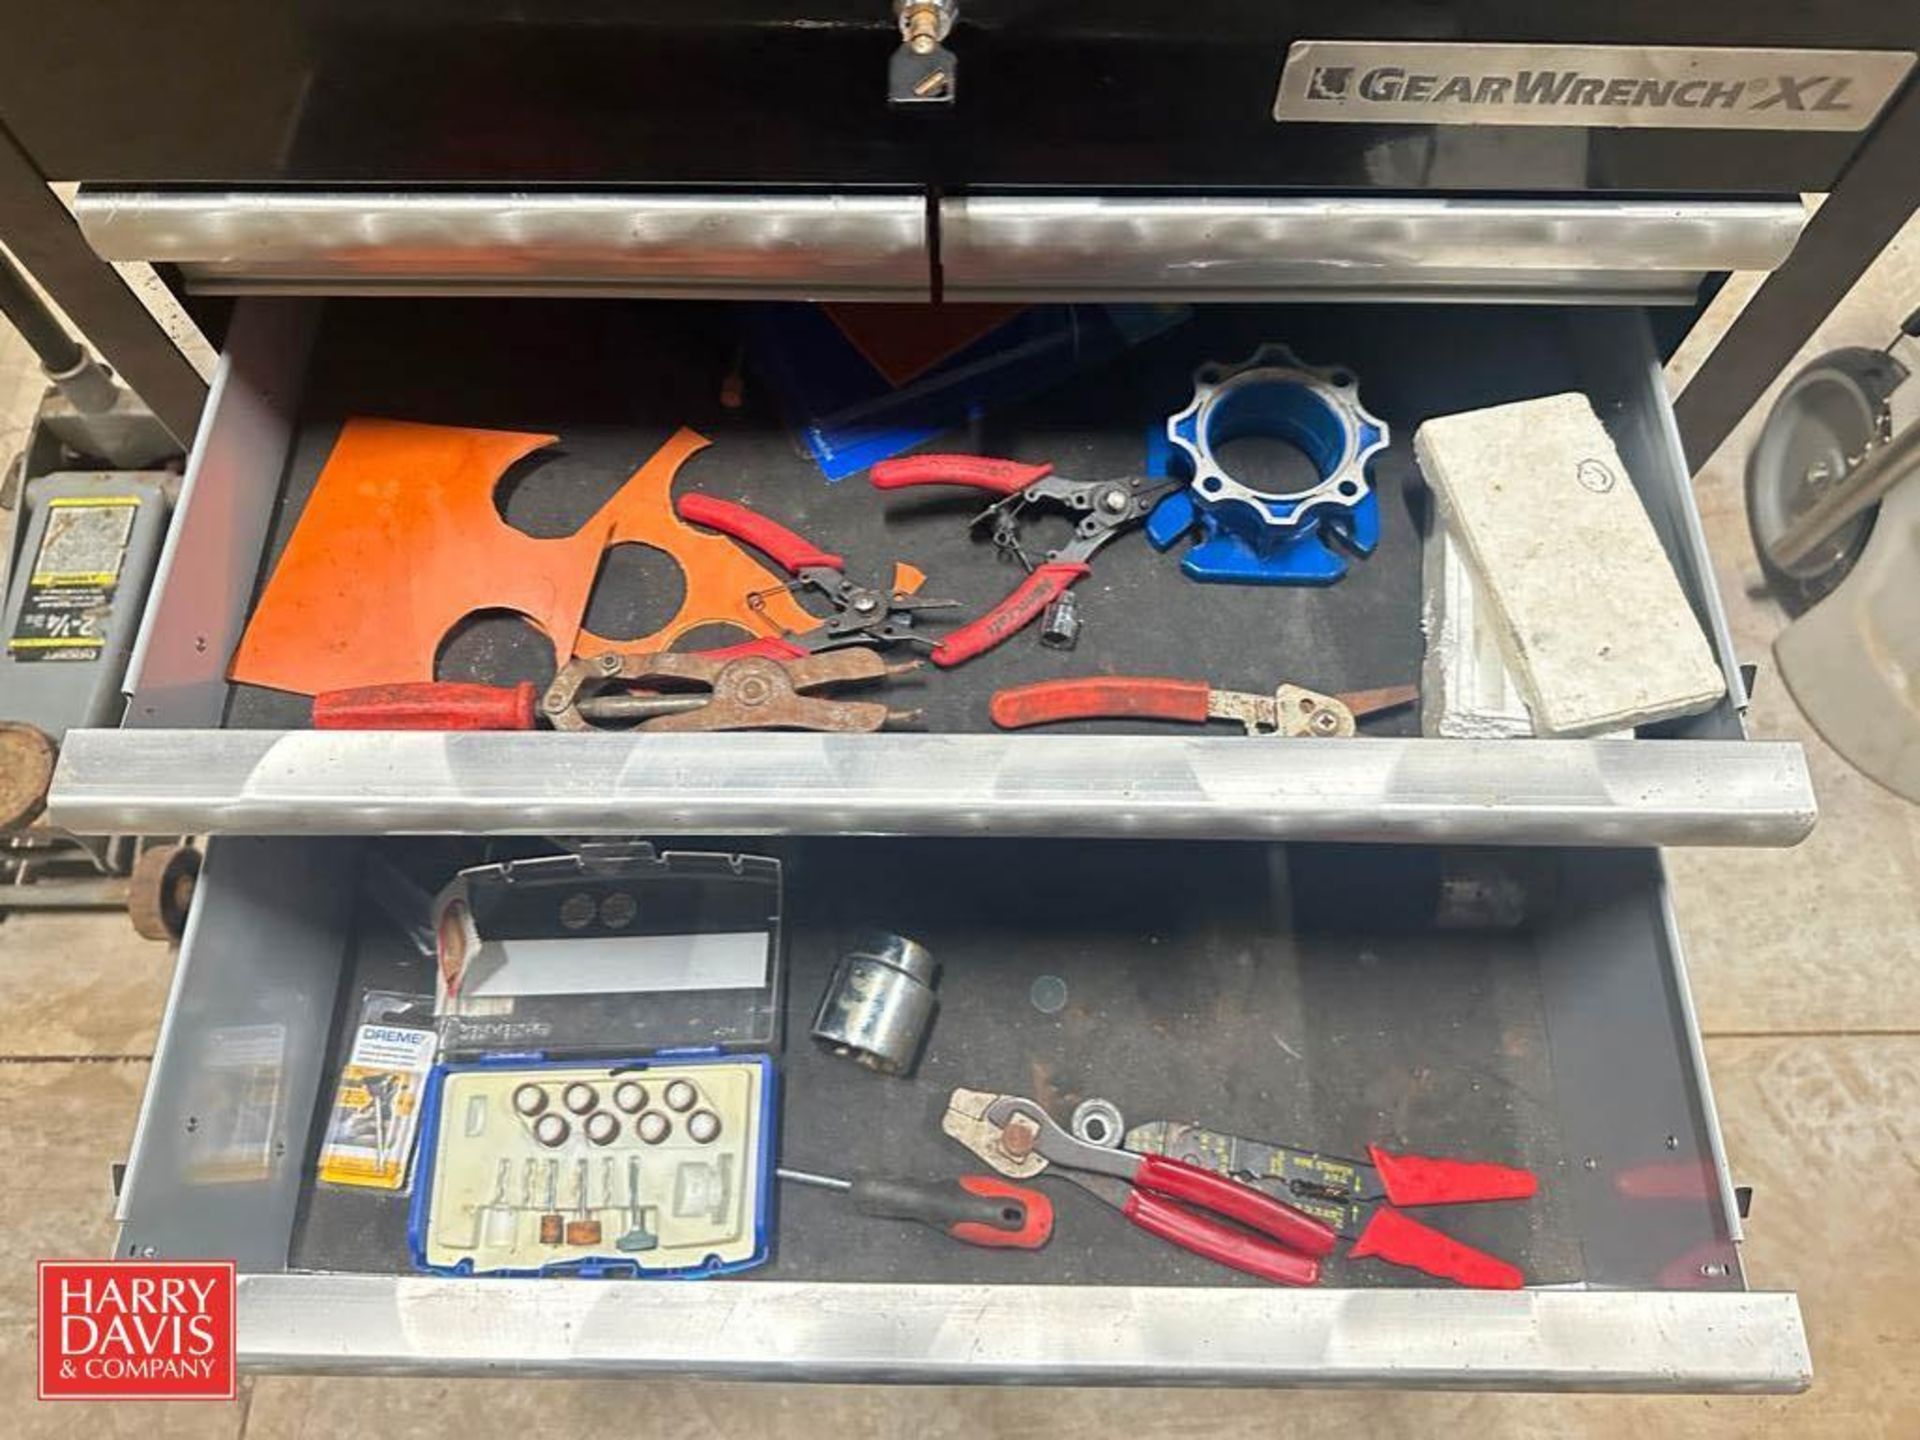 Gear Wrench XL Portable Tool Box with Allen Wrenches, Drill Bits, Electrical Testers and Wire Cutter - Image 3 of 3